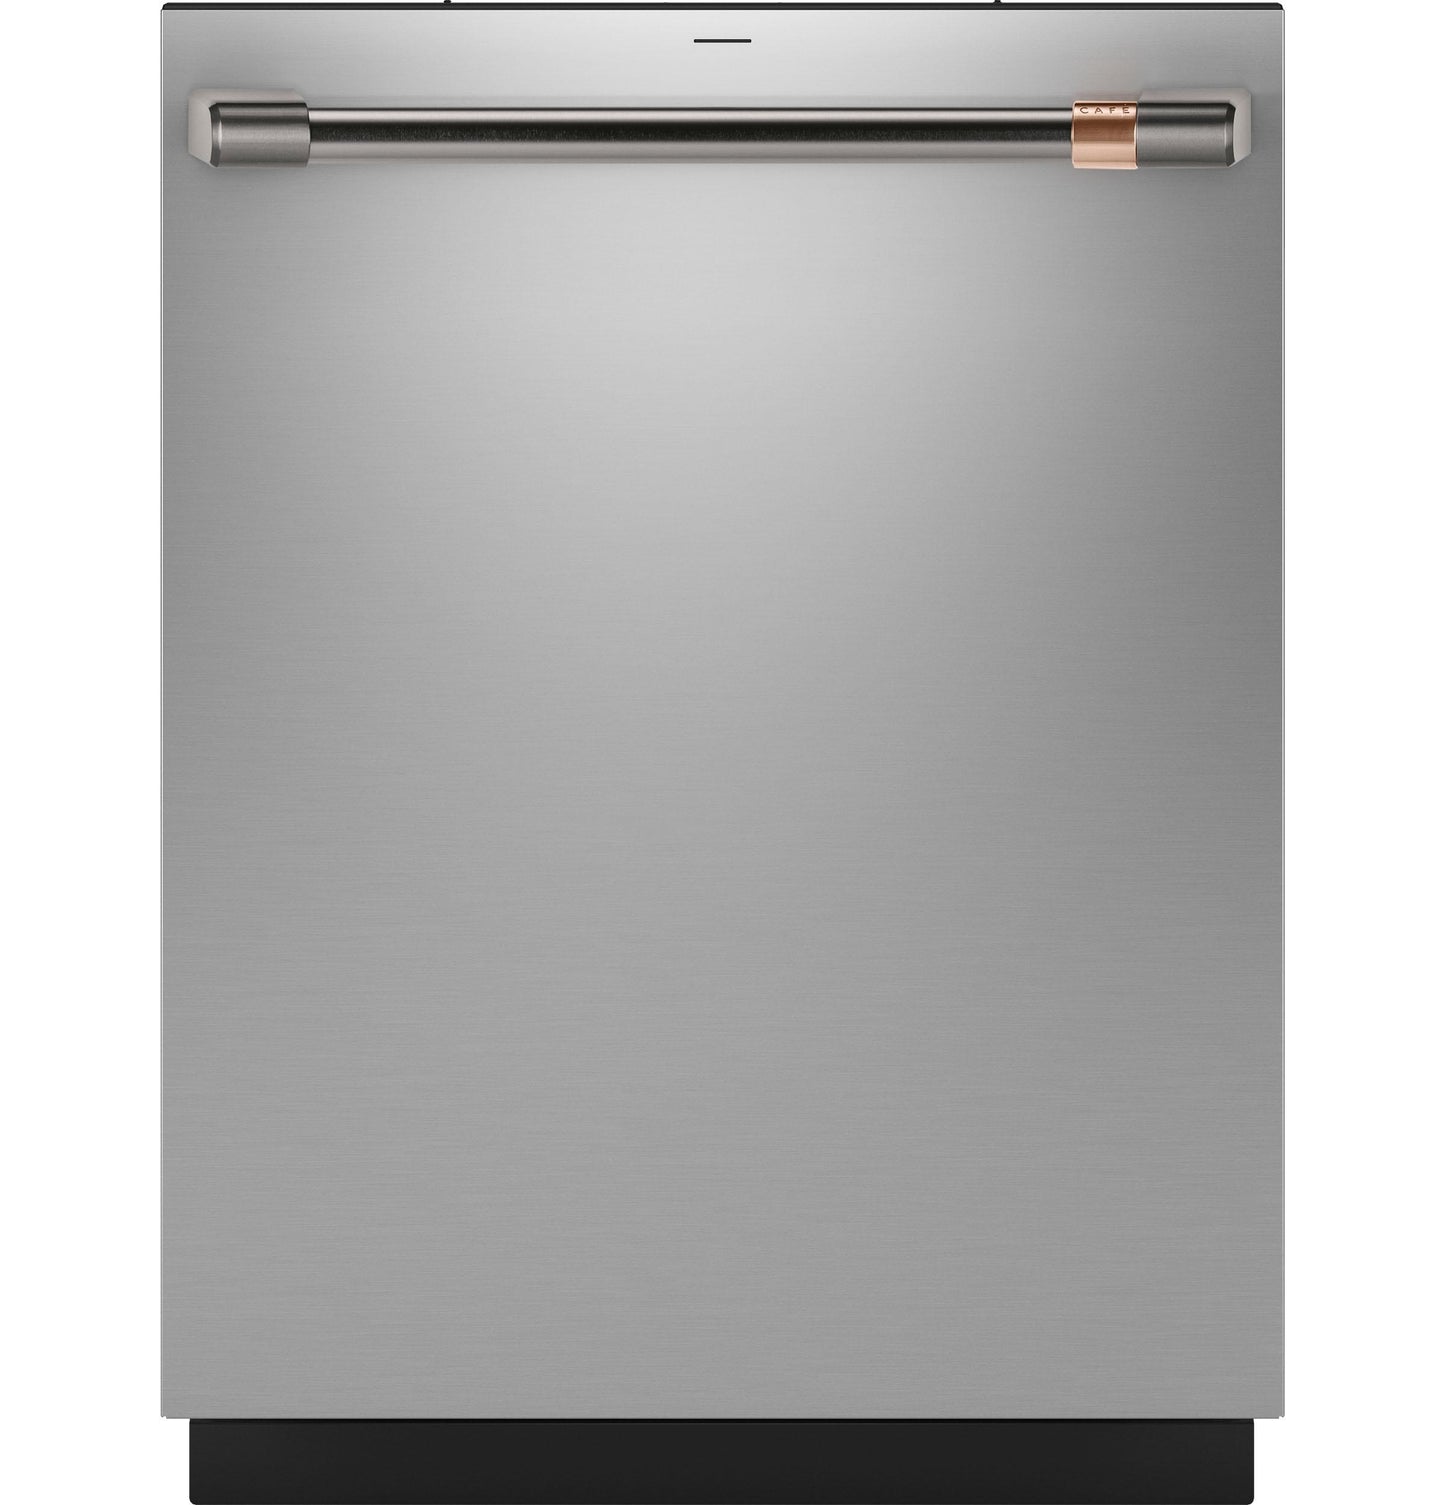 Cafe CDT828P2VS1 Café&#8482; Customfit Energy Star Stainless Interior Smart Dishwasher With Ultra Wash & Dry, 42 Dba